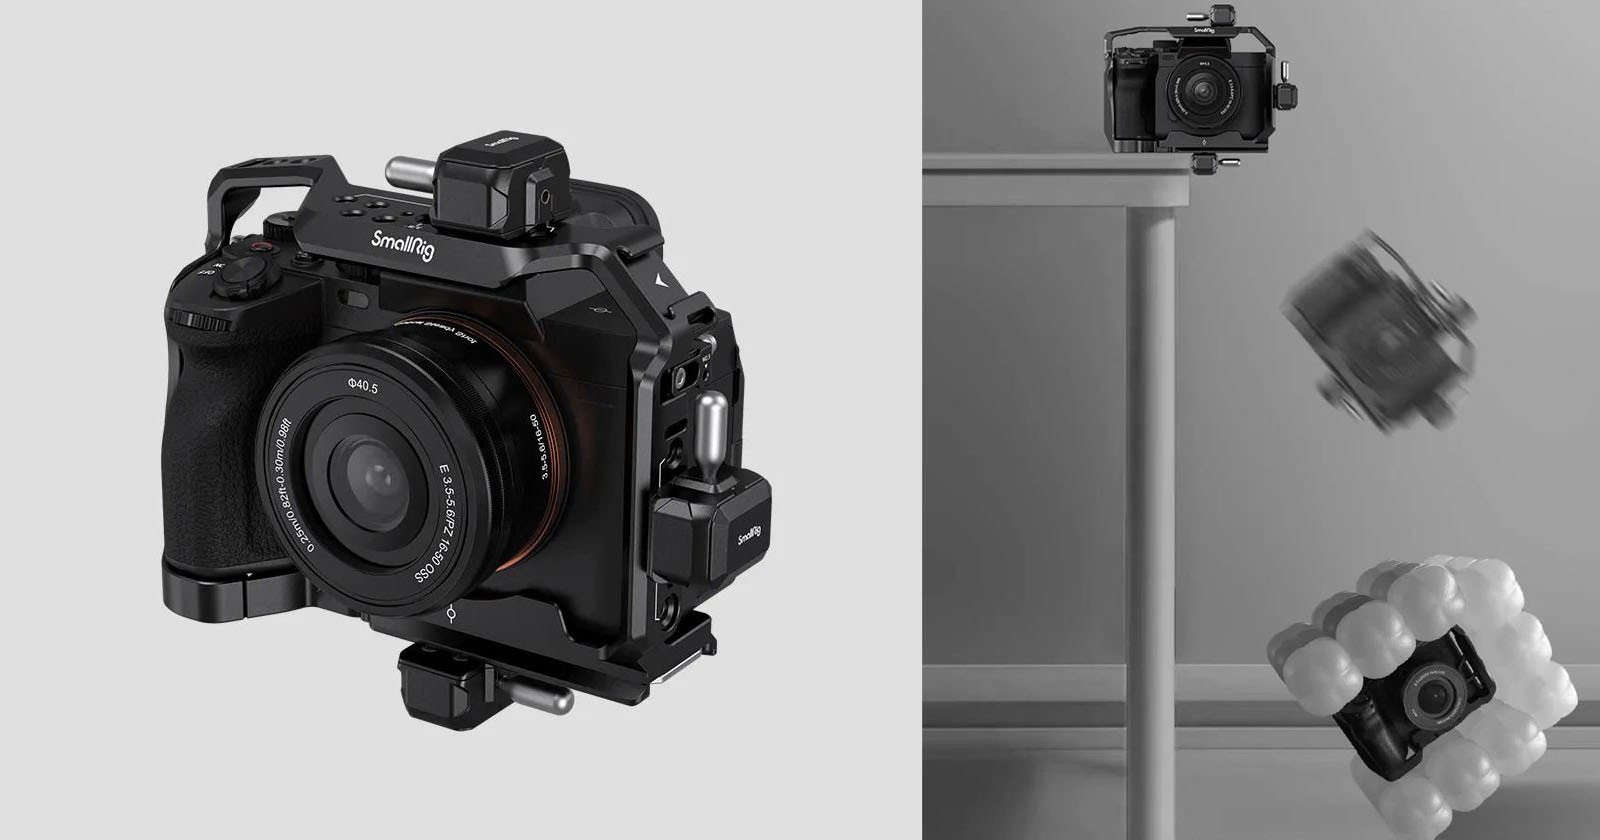 SmallRig Made an Airbag for Your Camera